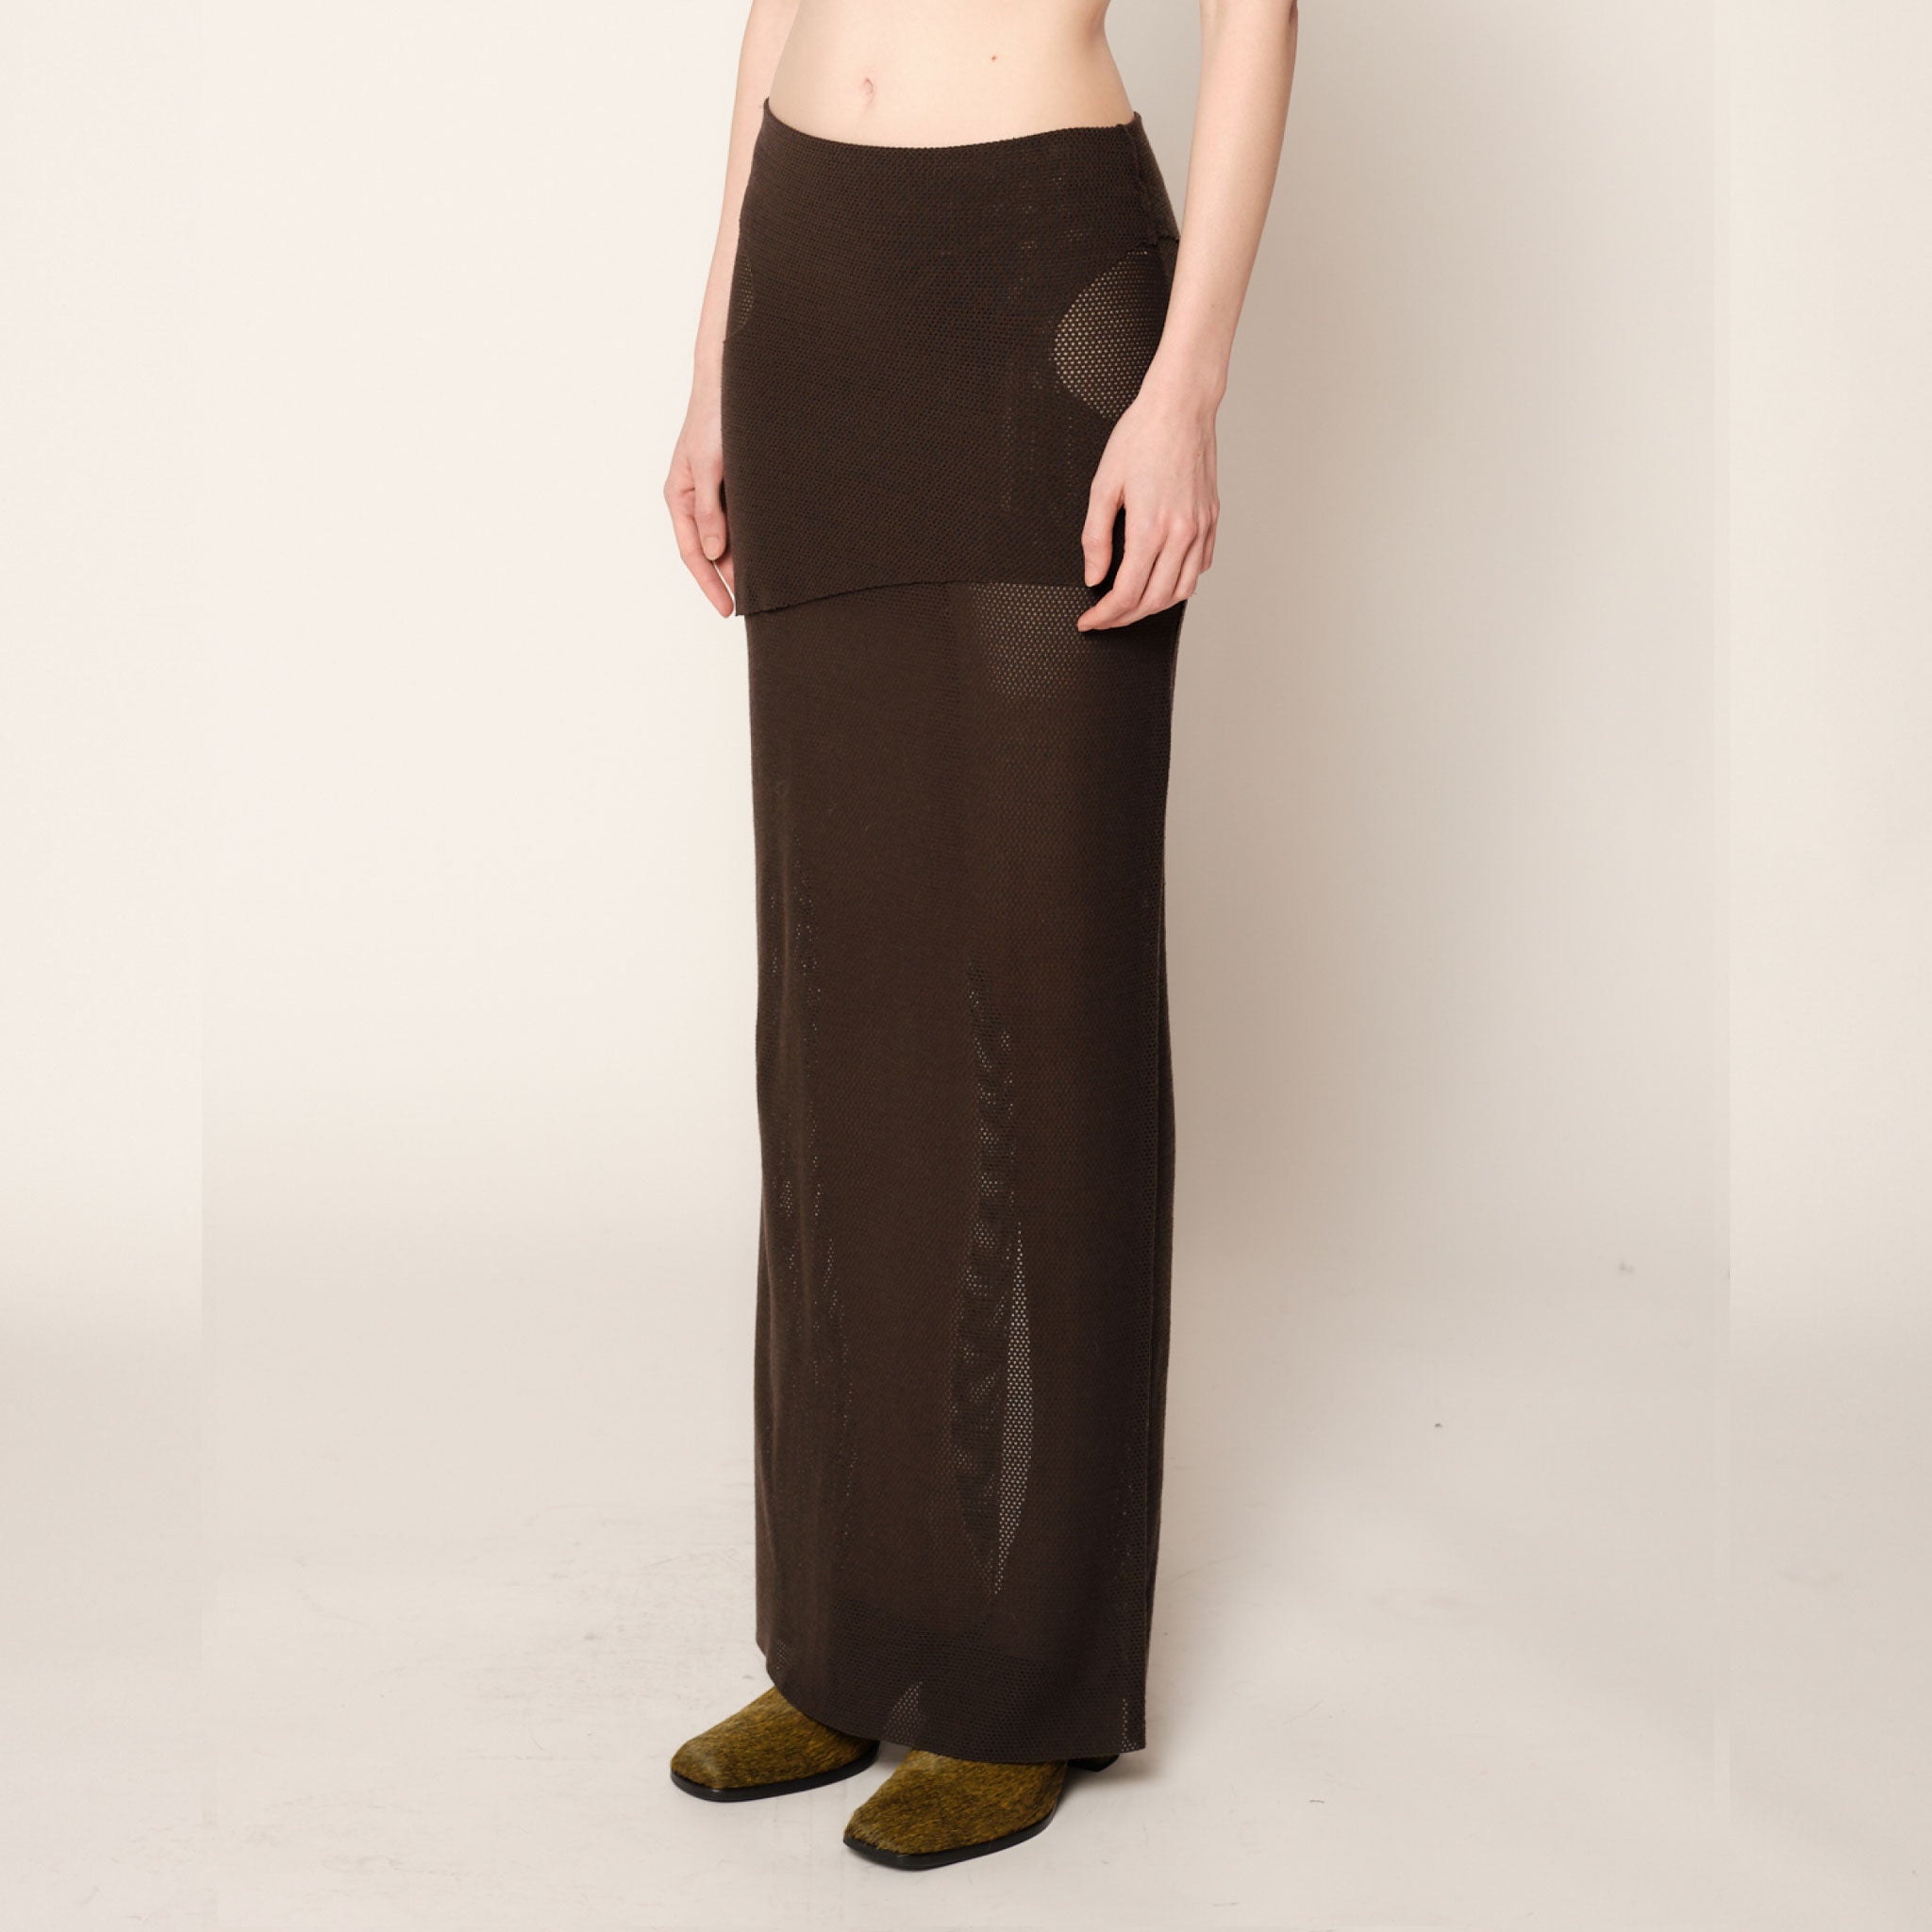 Side half body photo of model wearing the Eclipse Skirt - Stone.